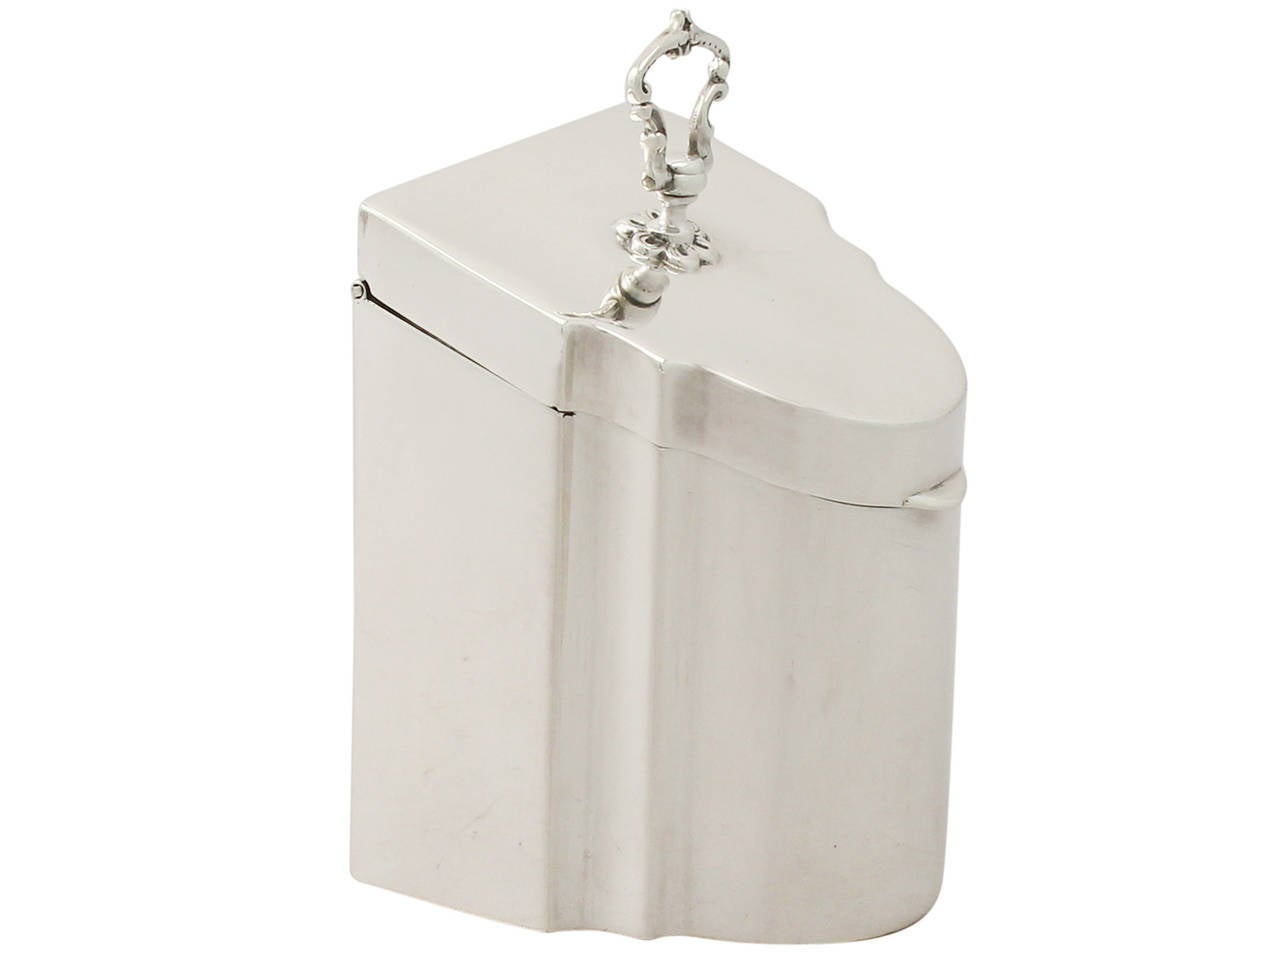 A fine and impressive antique Edwardian English sterling silver tea caddy; an addition to our silver teaware collection.

This fine antique Edwardian sterling silver tea caddy has been realistically modelled in the form of an antique knife